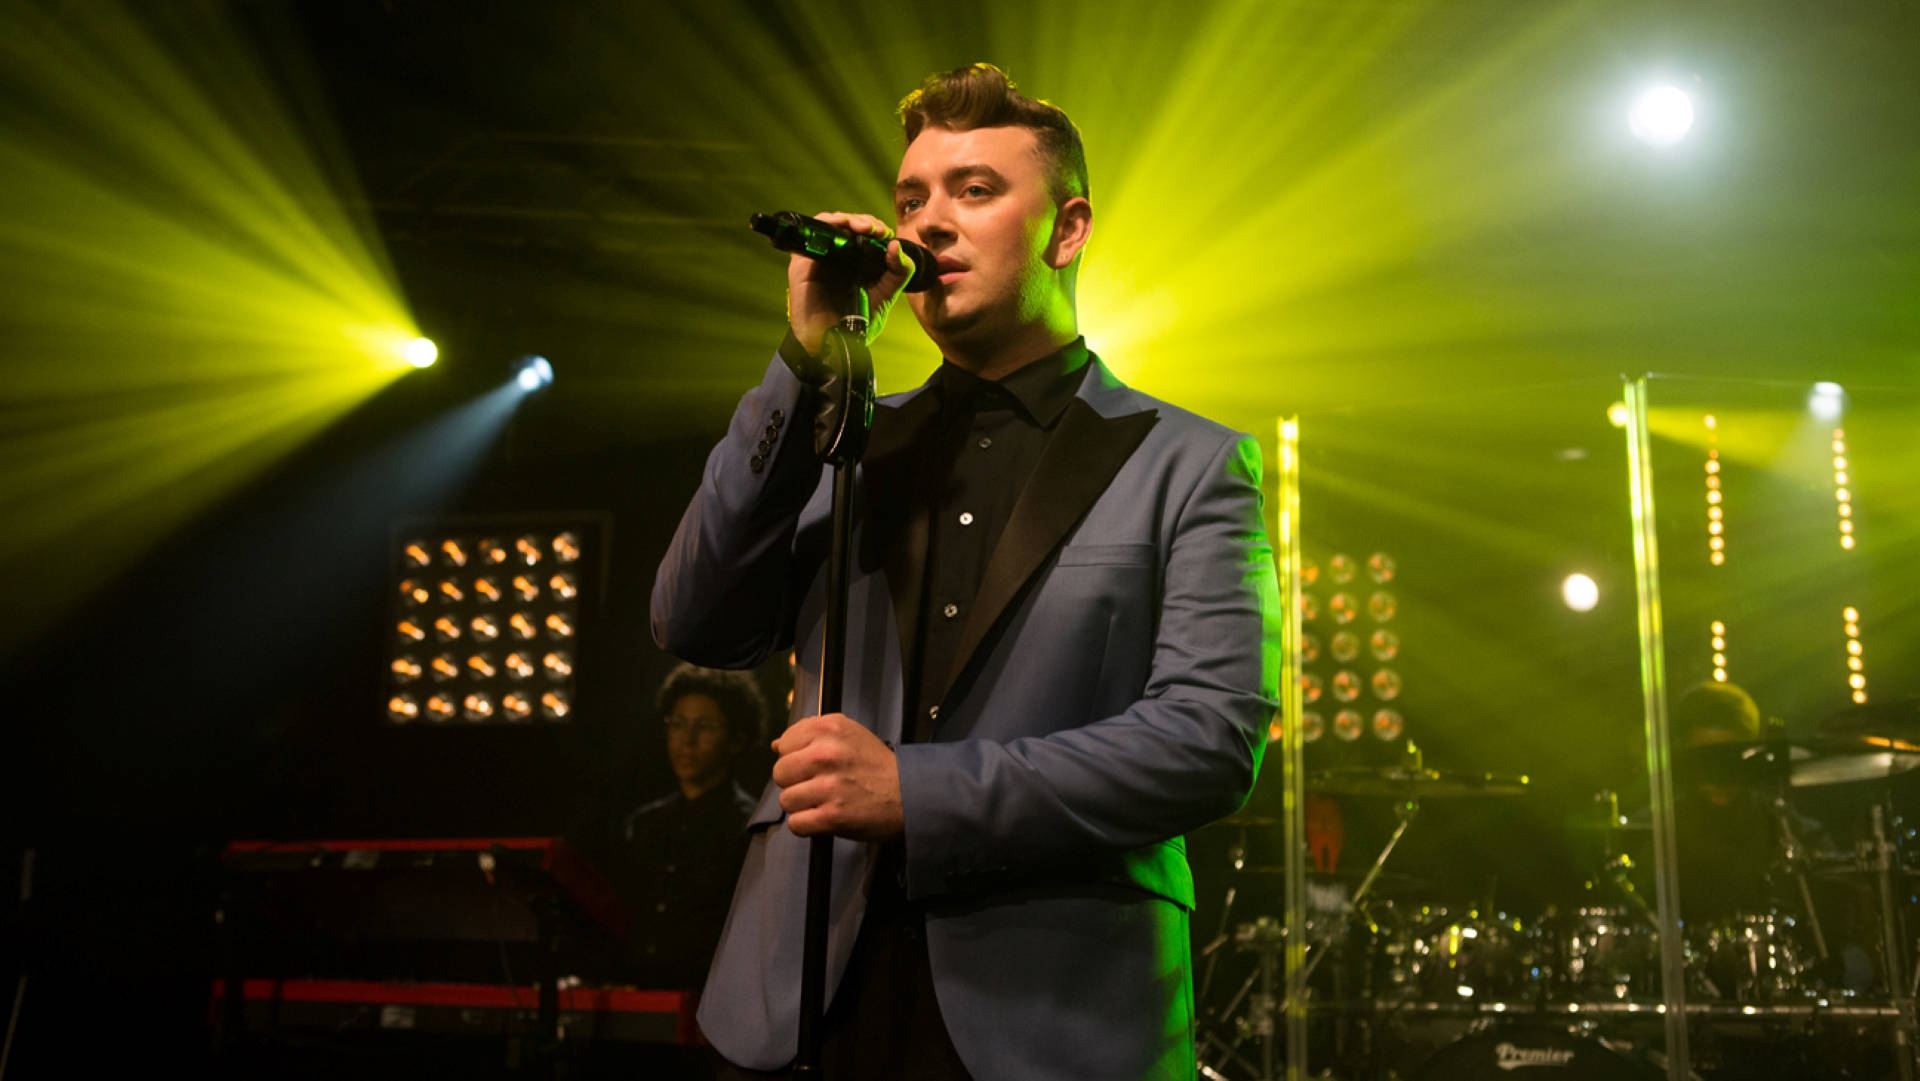 Sam Smith At Iheartradio Background